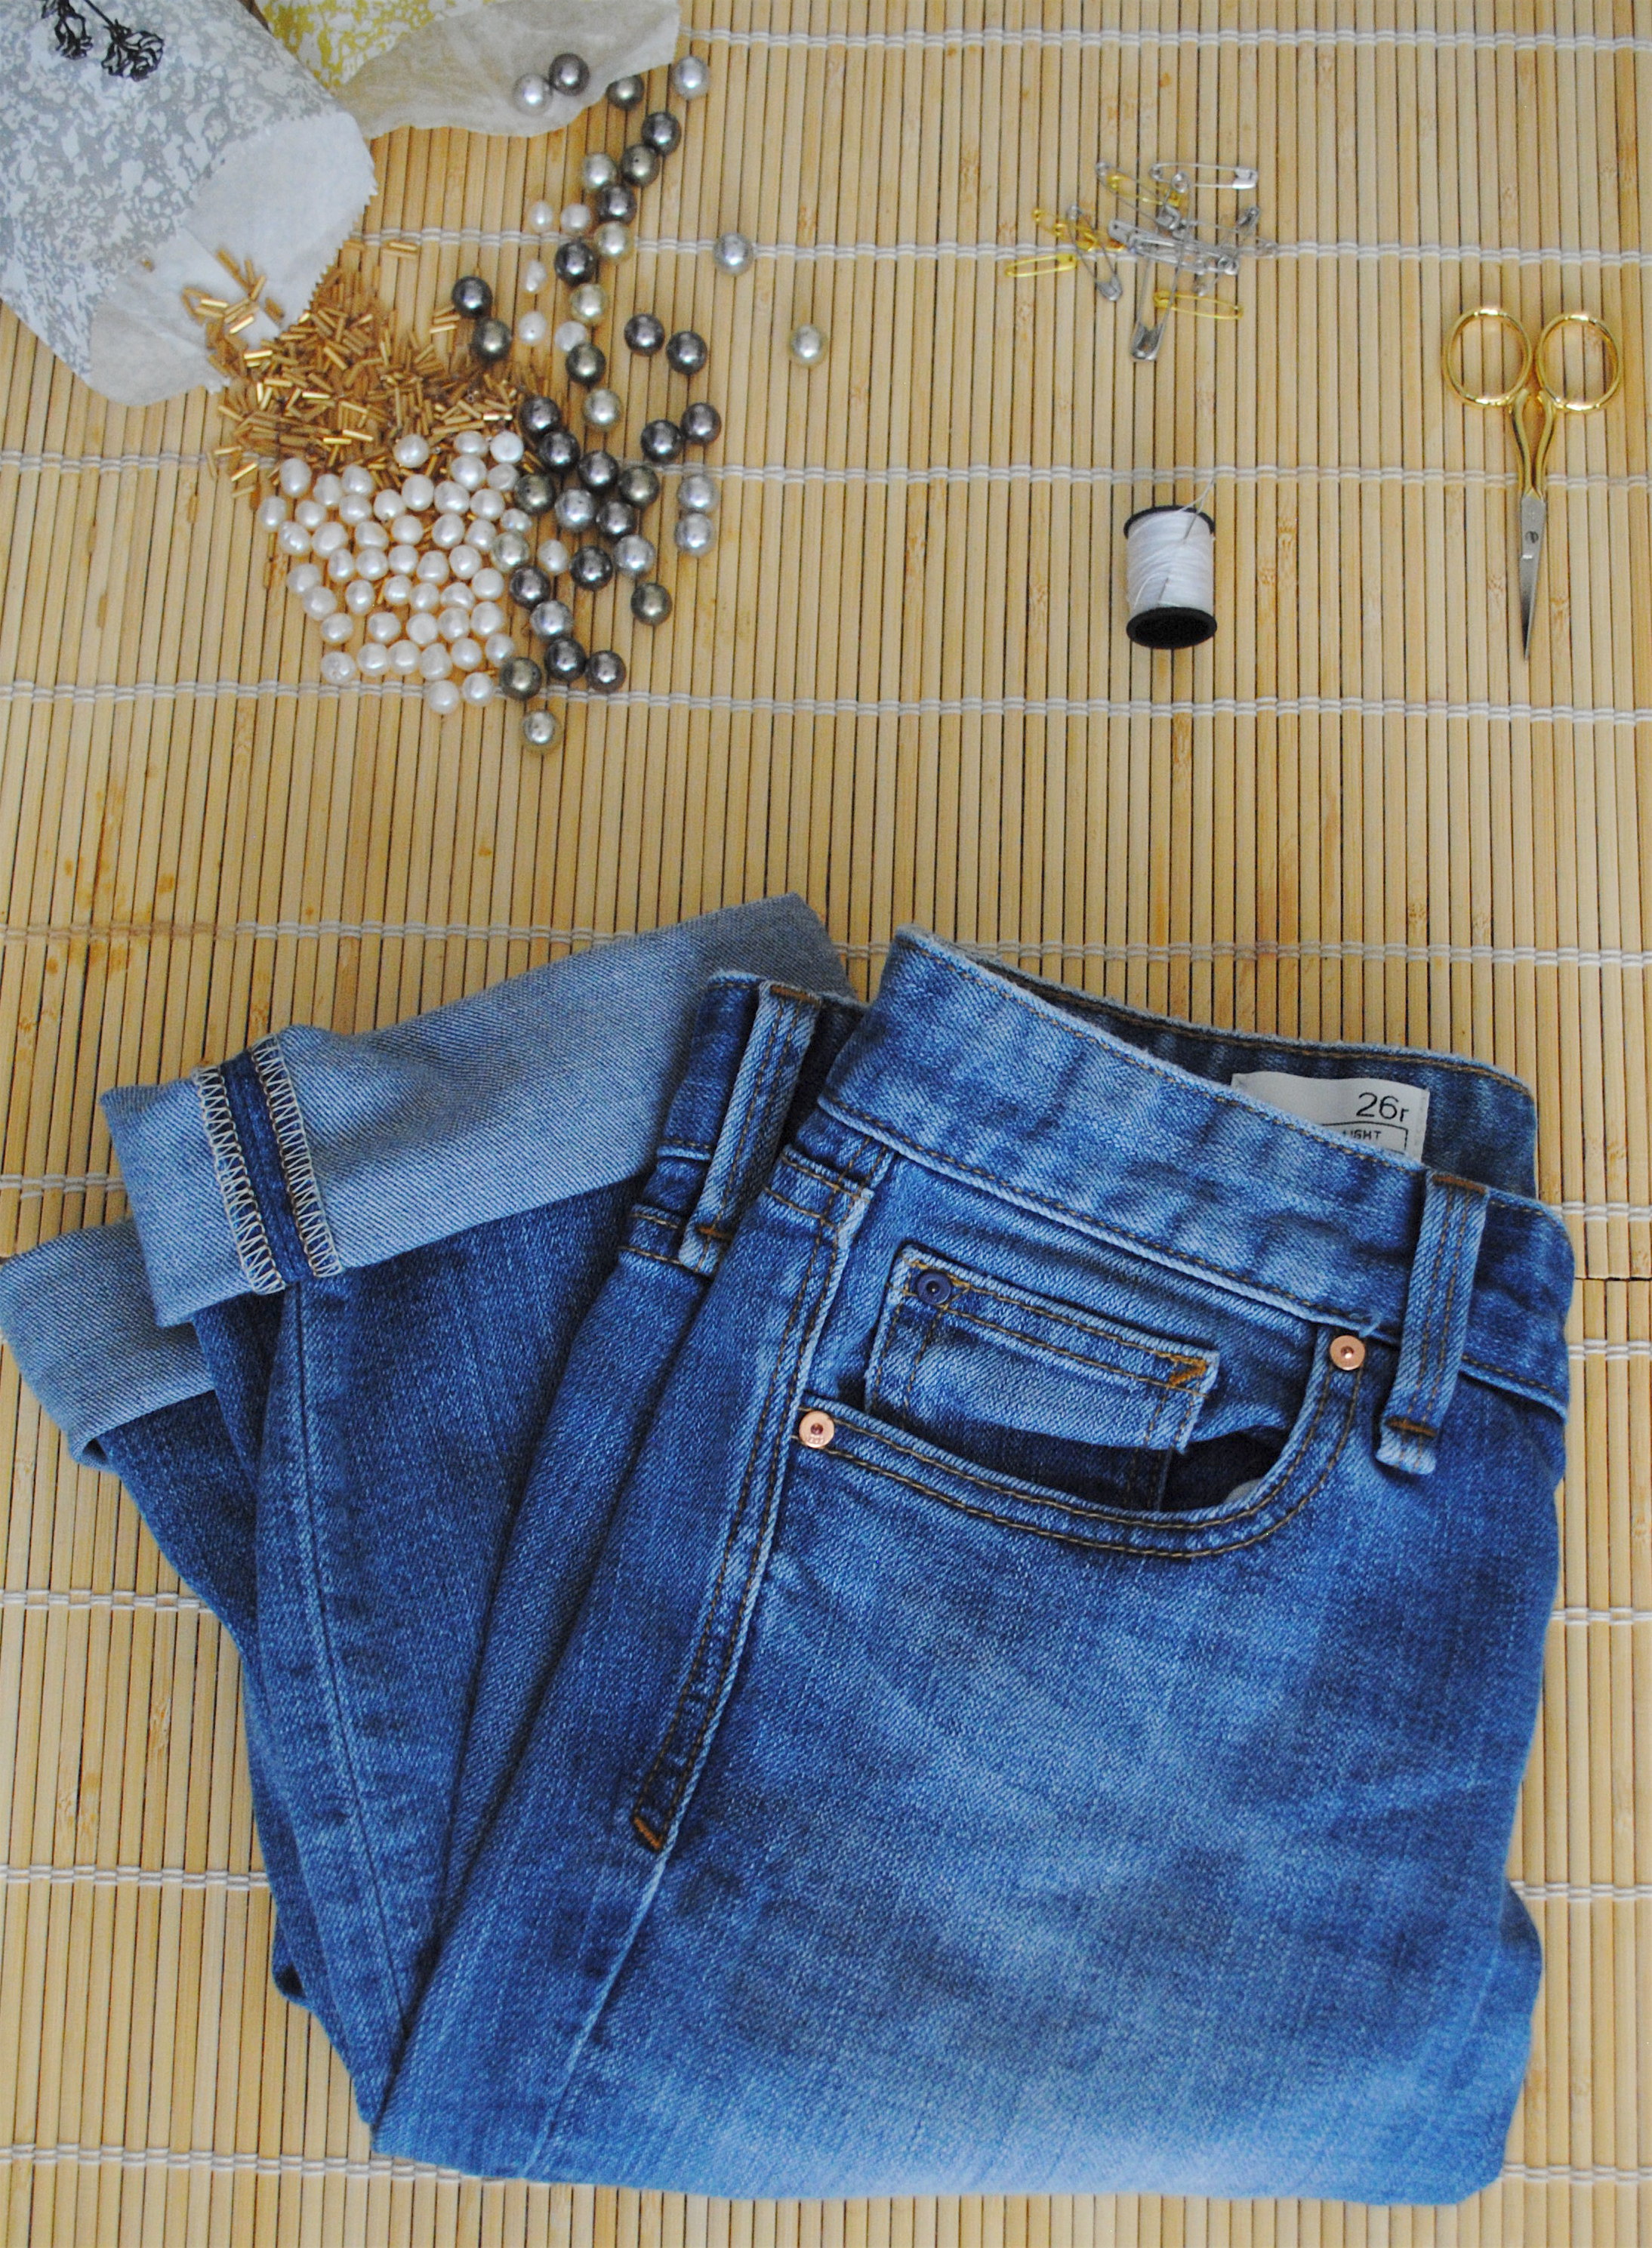 Use This Simple Jean Shorts DIY to Upcycle an Old Pair of Denim - Brightly